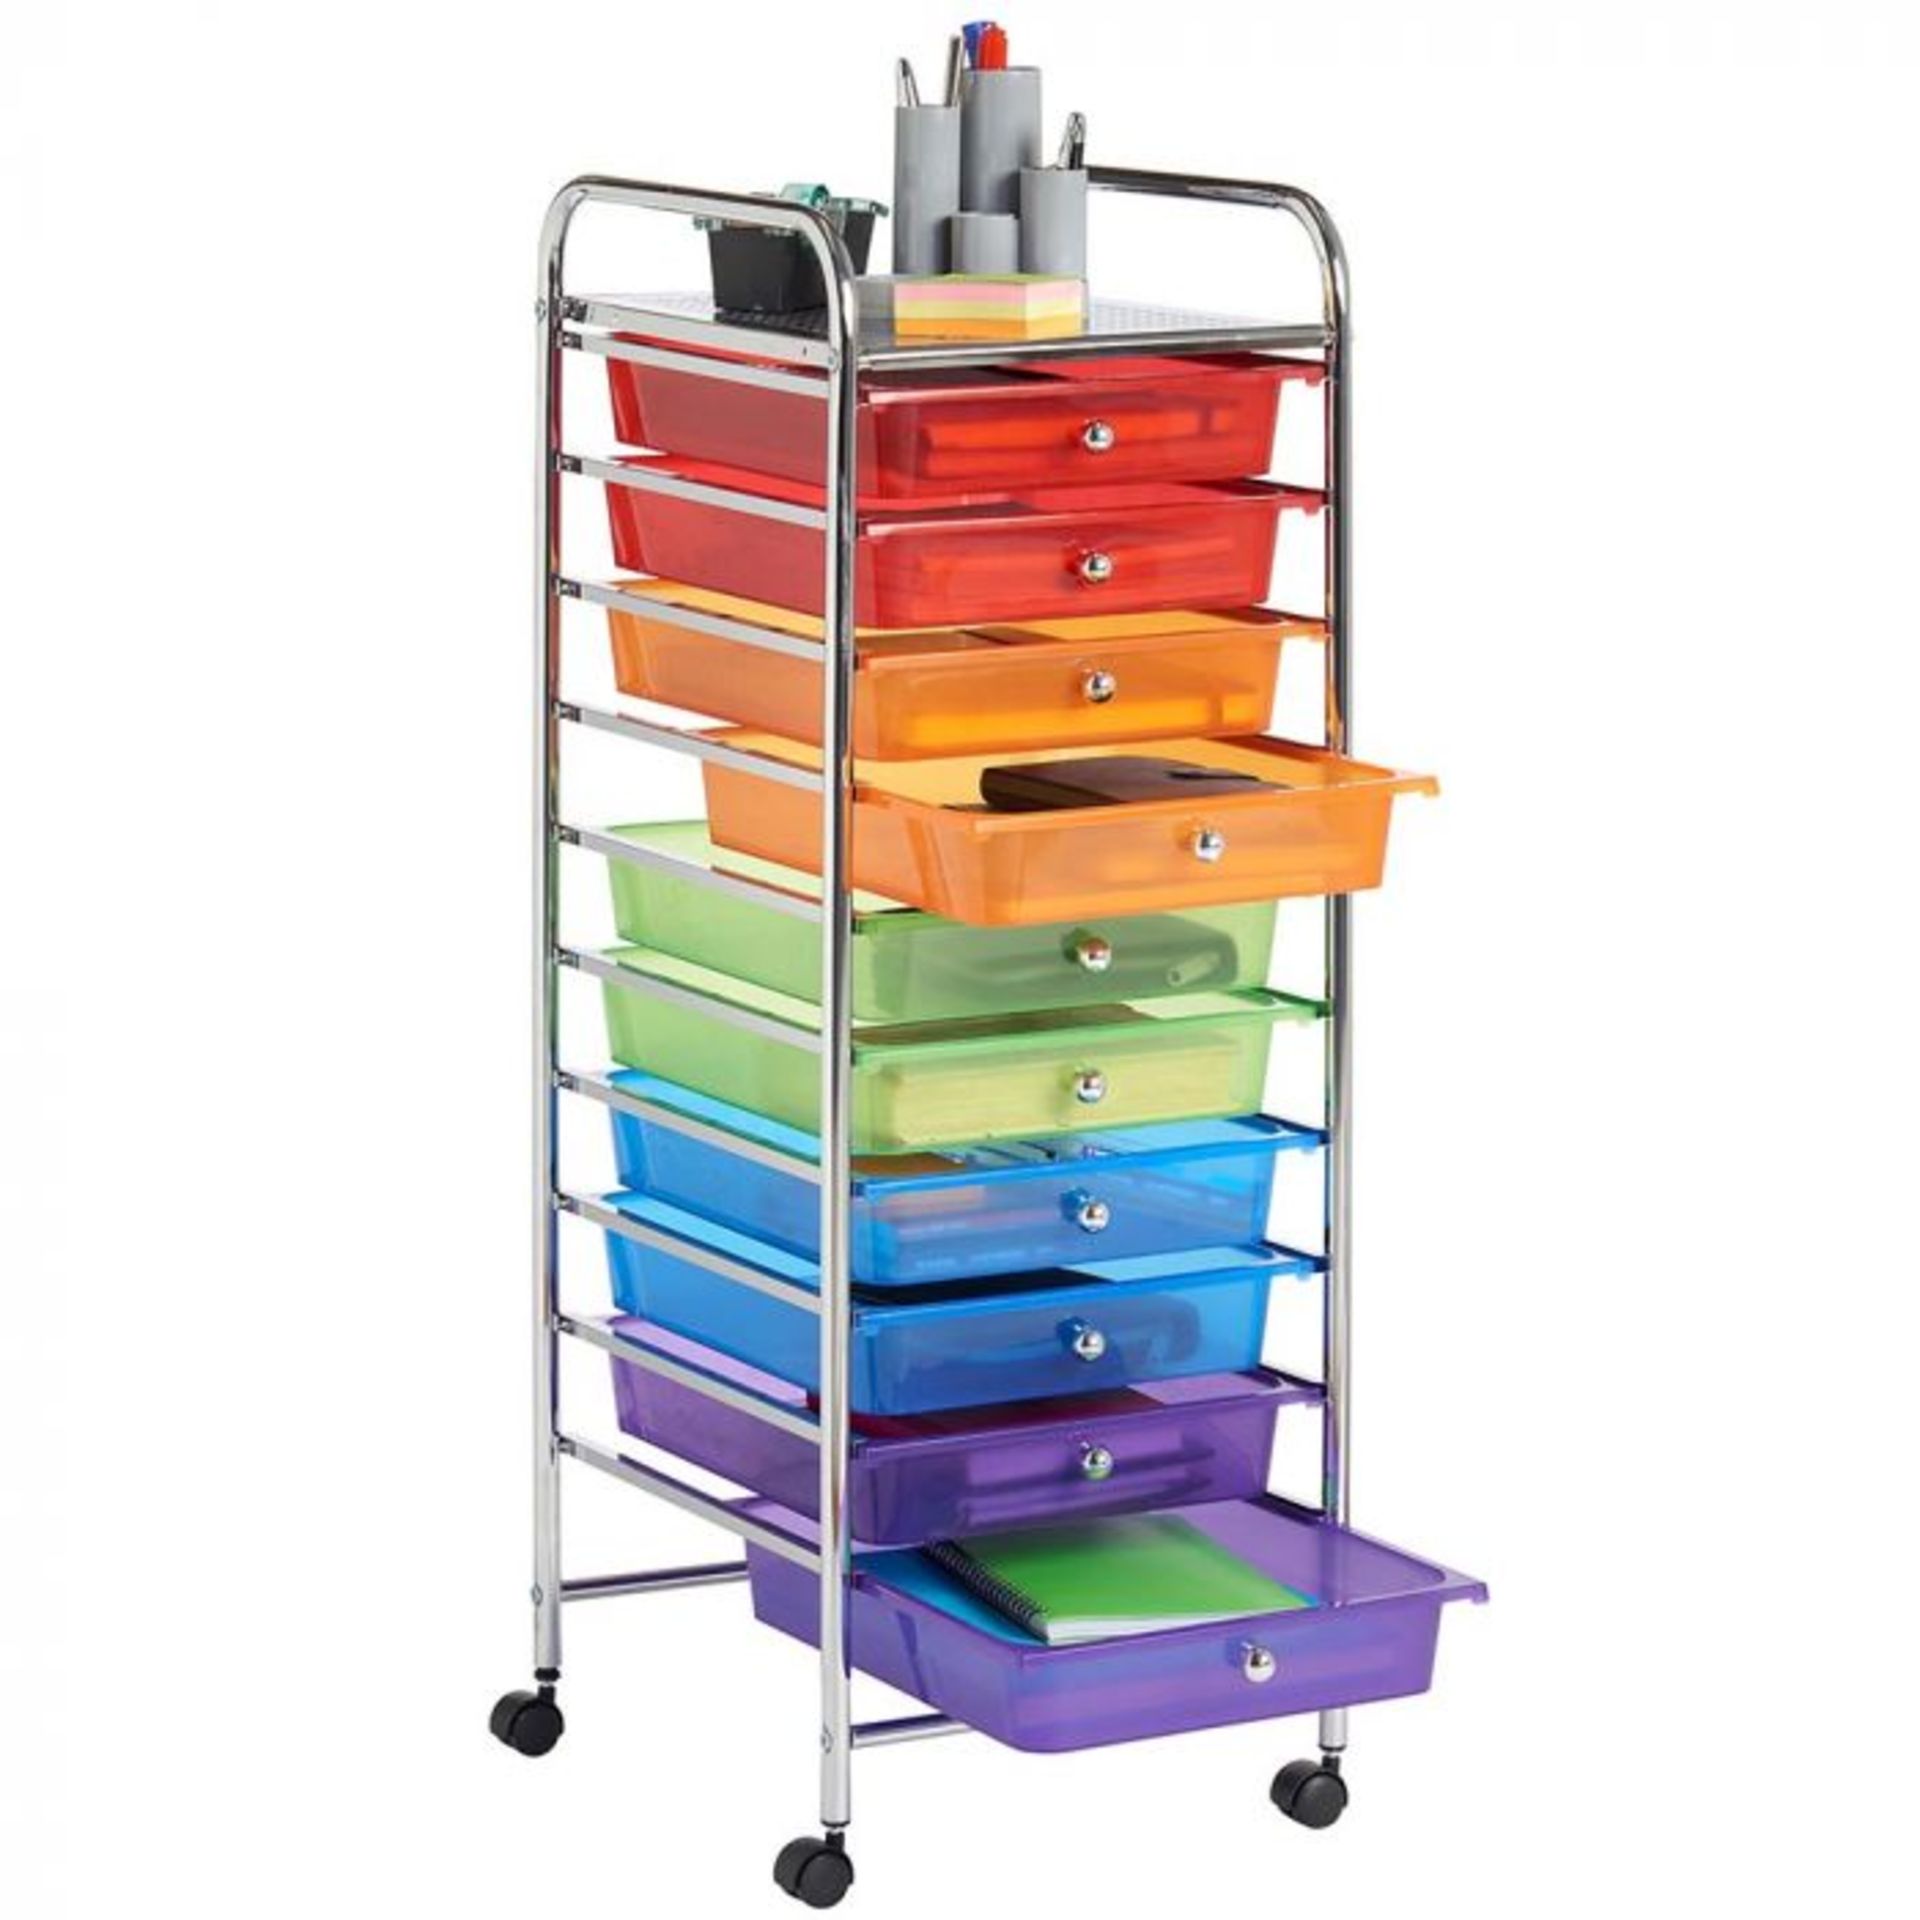 (V84) 10 Drawer Trolley - Multi Colour Versatile 10 drawer storage trolley - great for homes, ... - Image 4 of 4